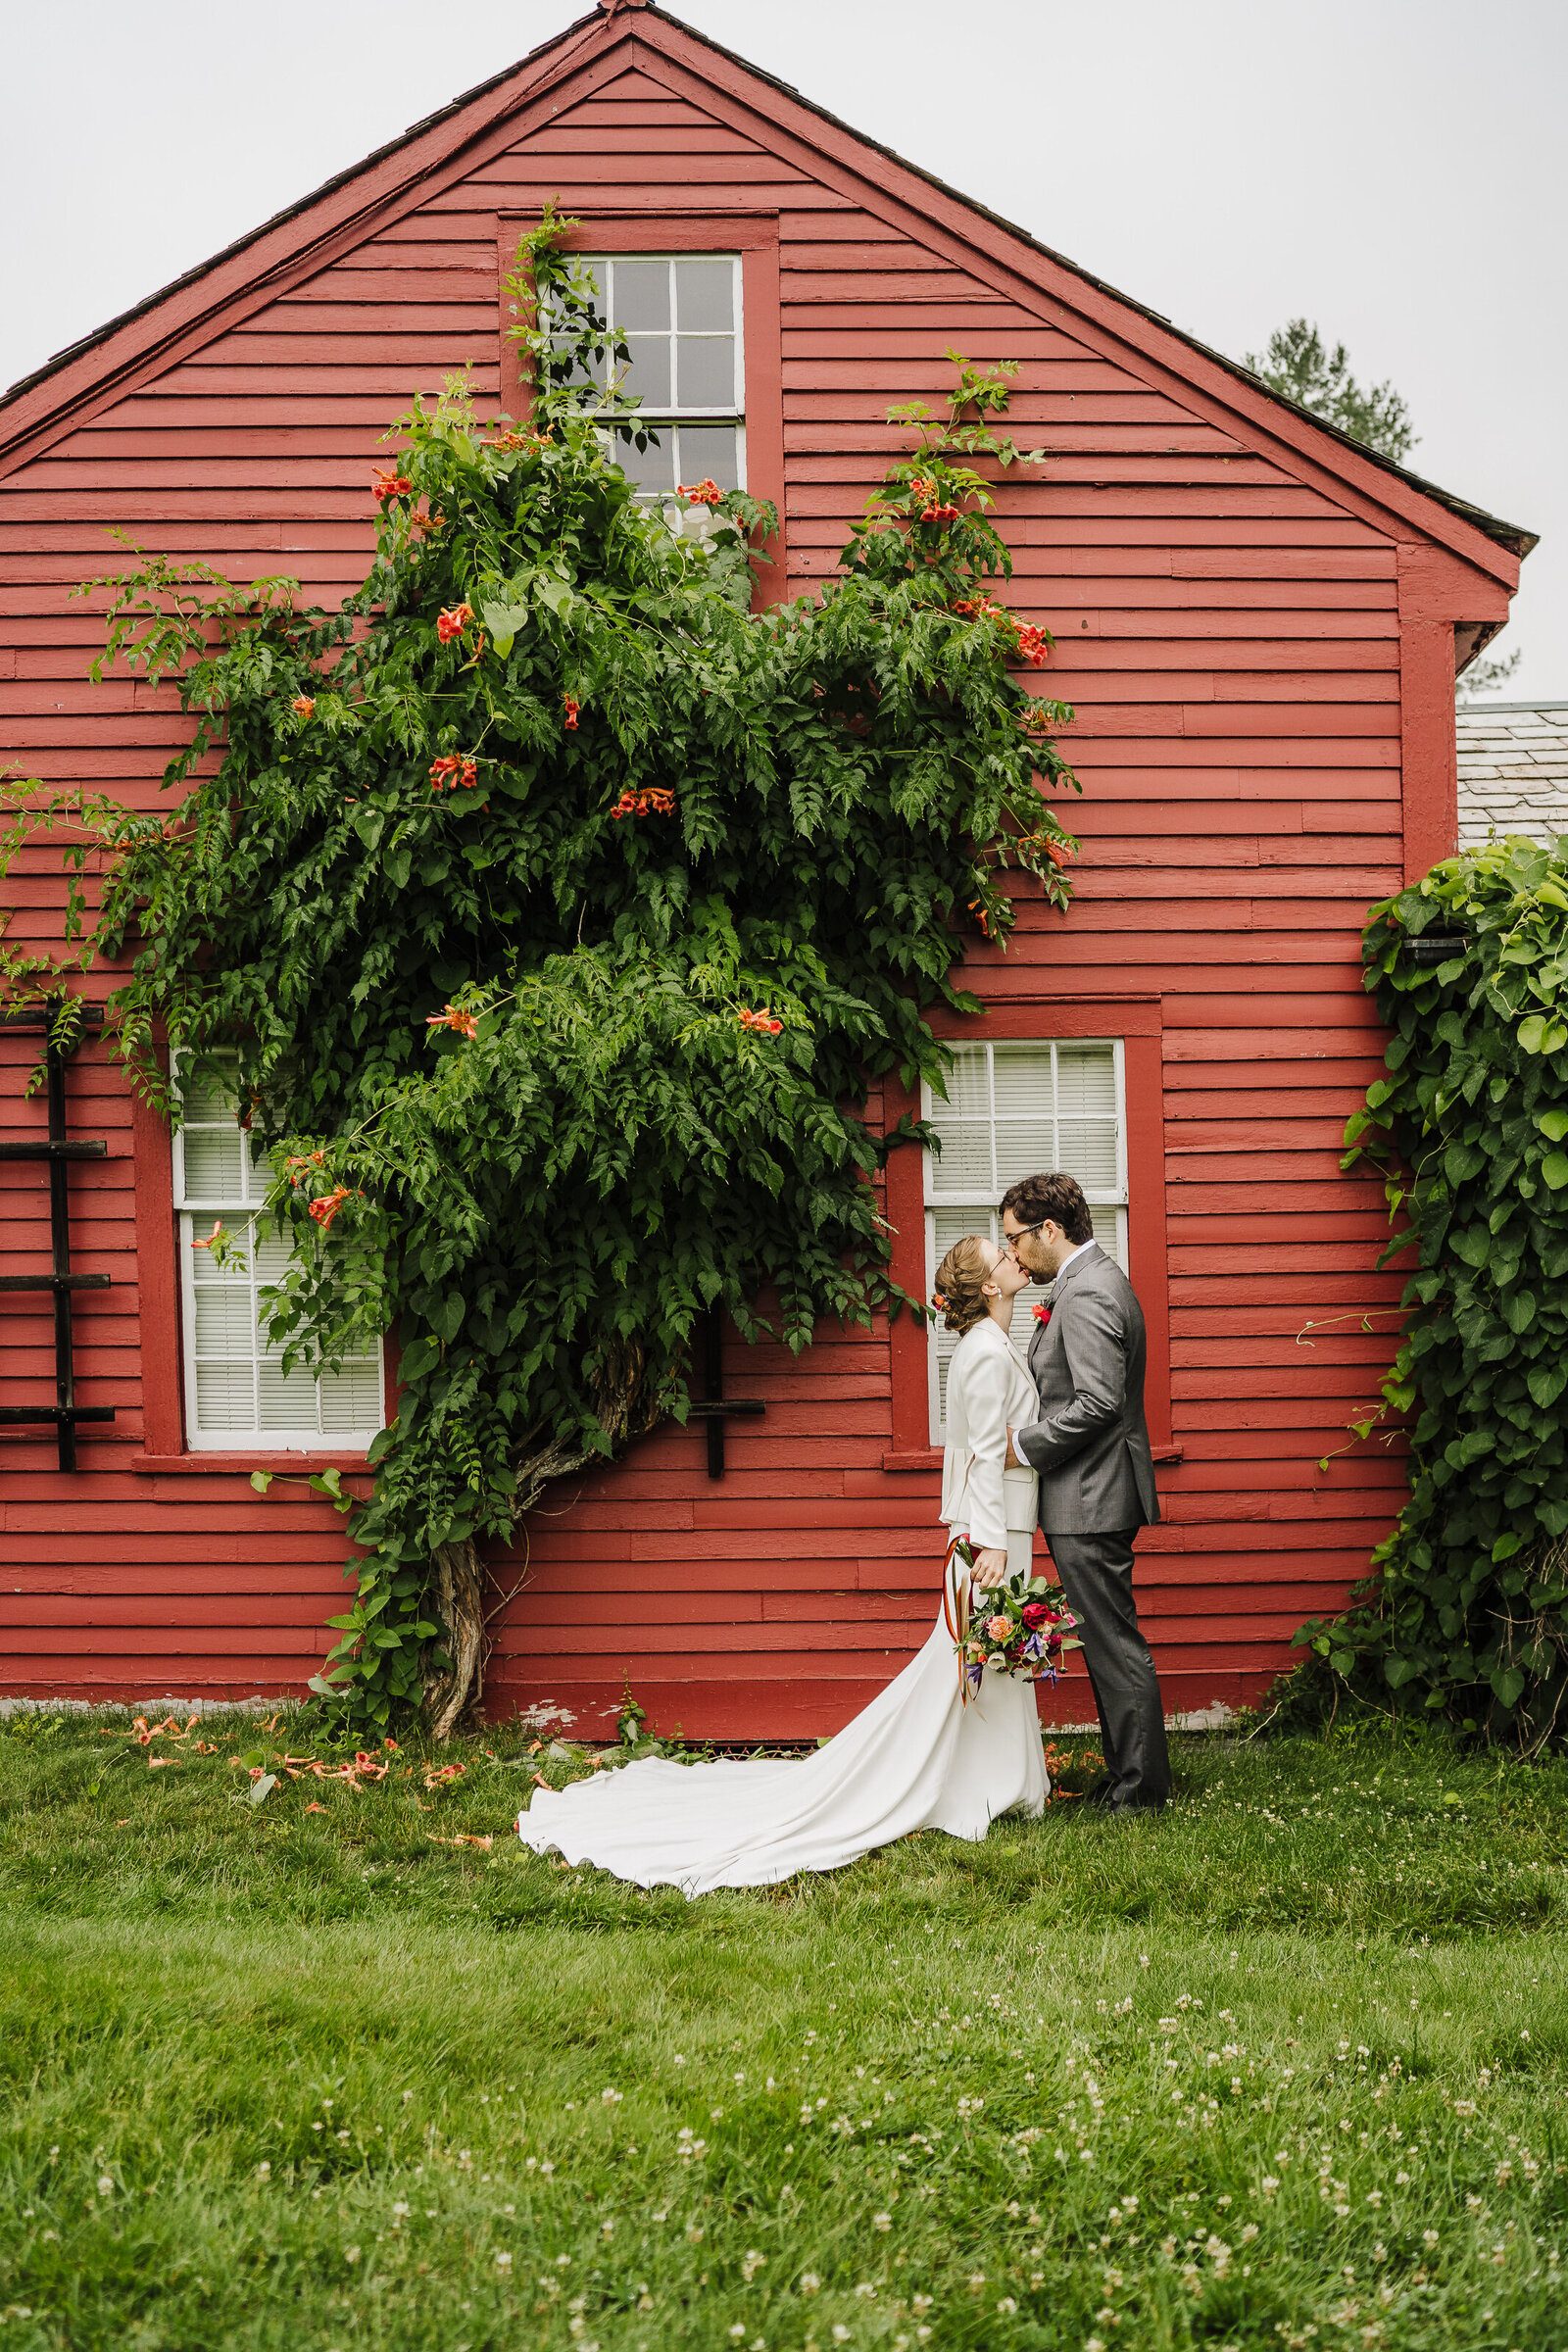 wedded couple stands in front of red building